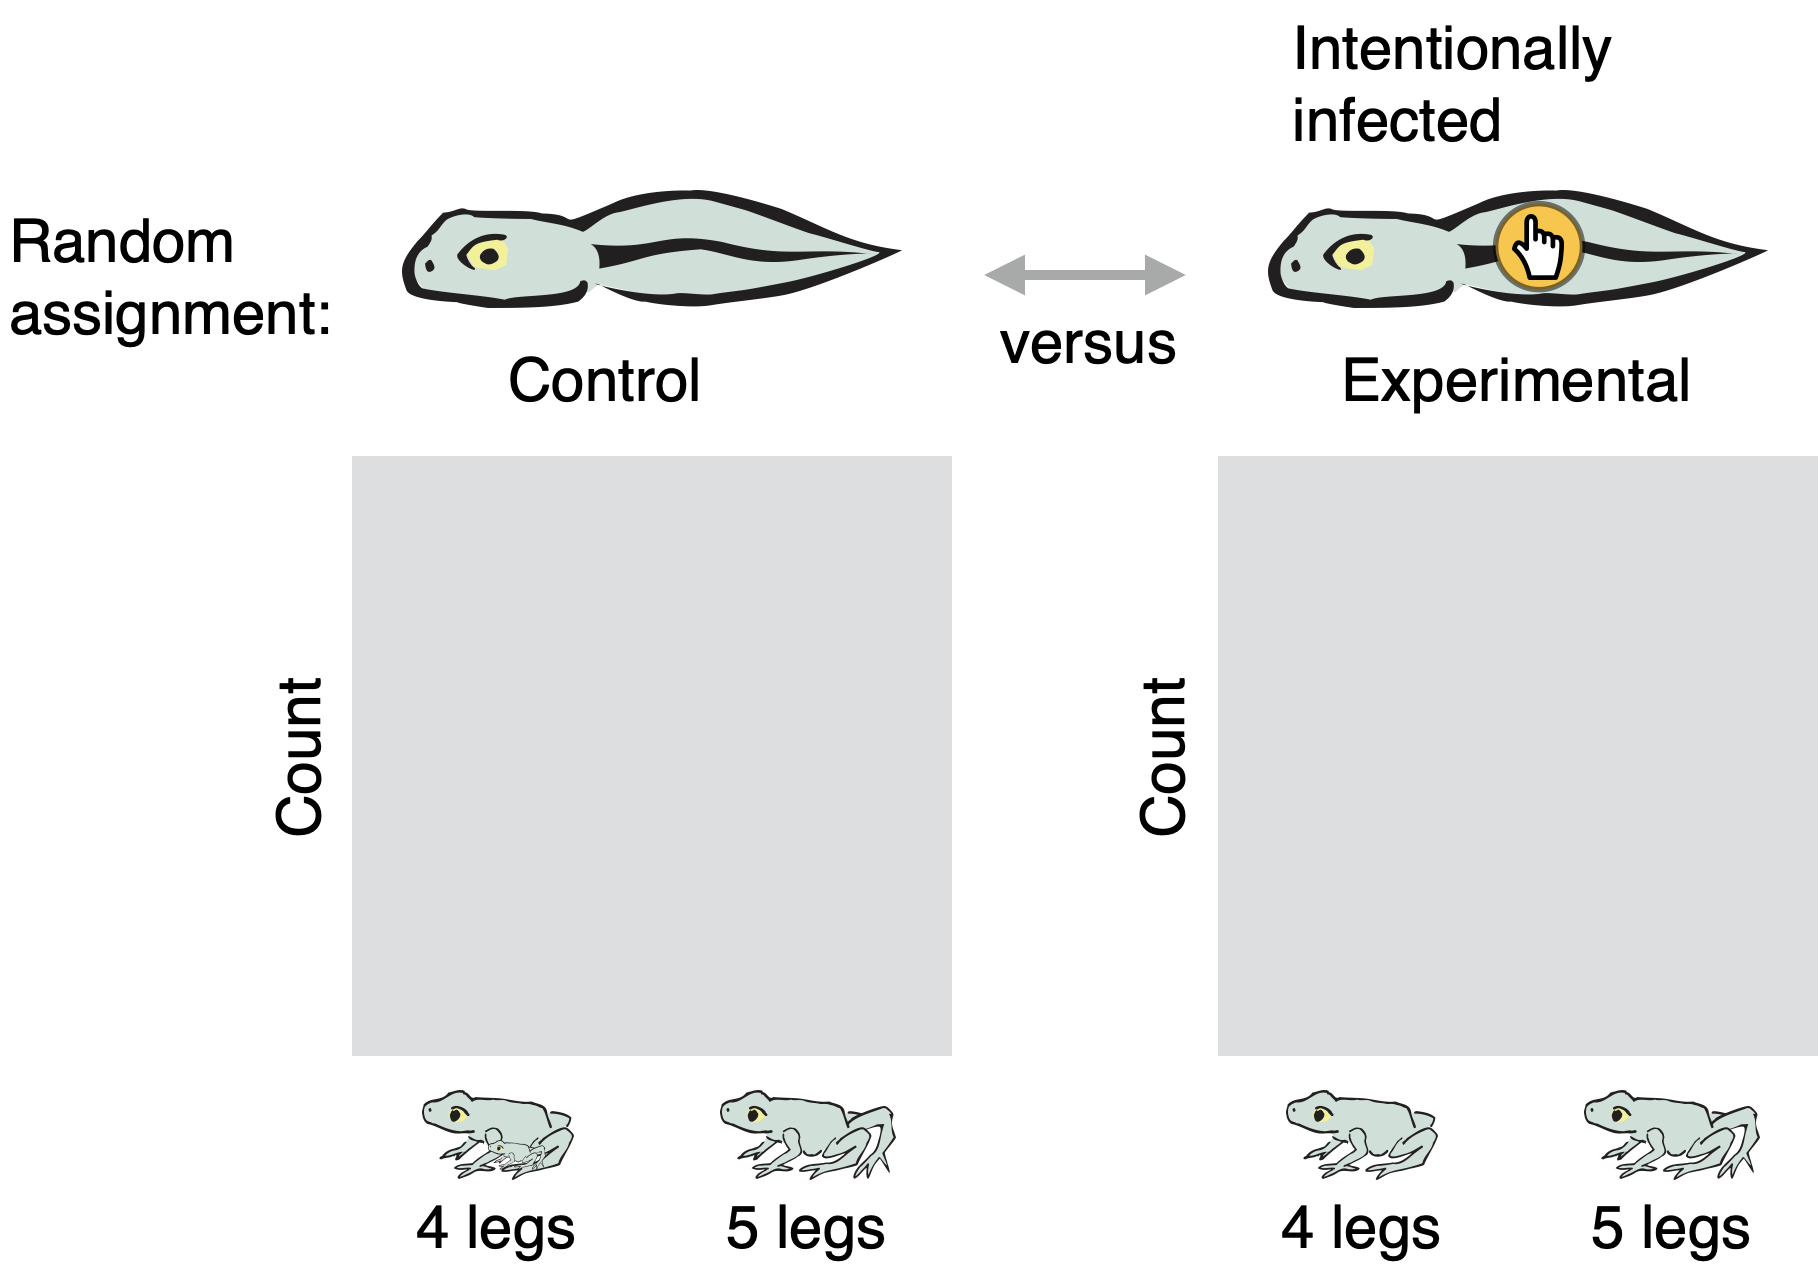 Diagram showing the setup for a pair of side-by-side graphs. The first graph is labeled Control, with an illustration of an uninfected tadpole. The second graph is labeled Experimental, with an illustration of an intentionally-infected tadpole. A double headed-arrow labeled versus sits between the illustrations. In both graphs, the vertical axis is Count and the horizontal axis has categories 4 legs and 5 legs, each illustrated with a cartoon frog.